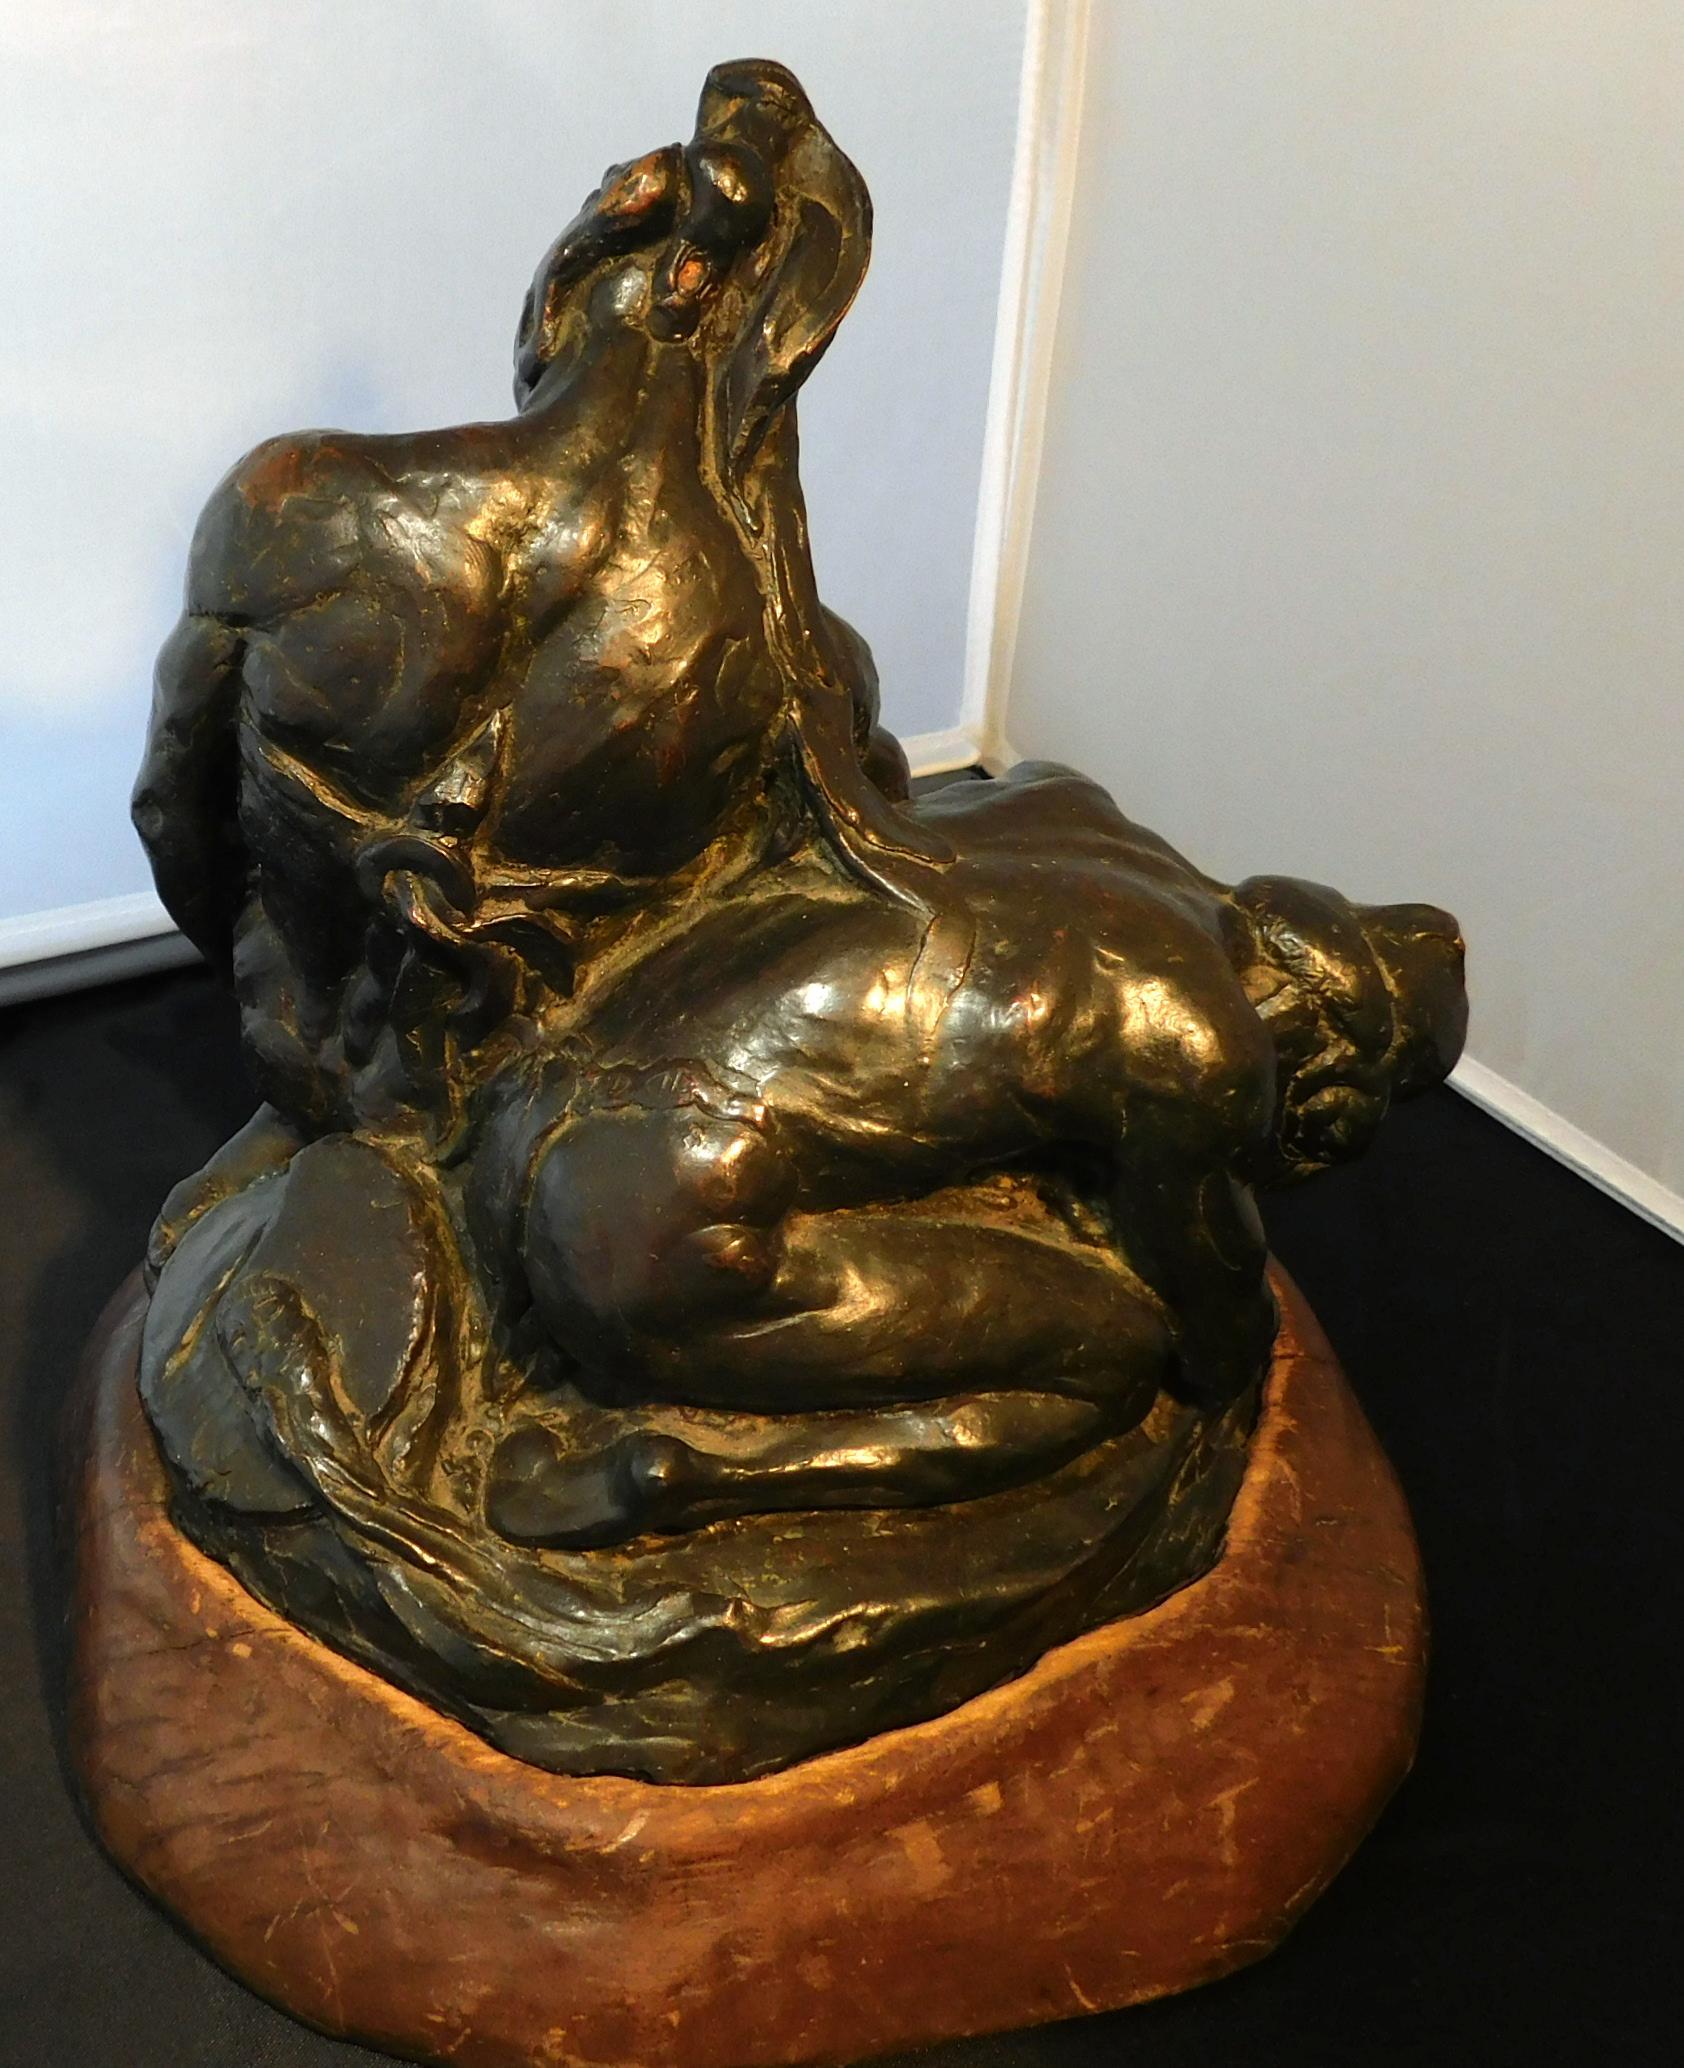 Donal Hord bronze sculpture, 1927. “Dying Warriors” 
Sits on a 2